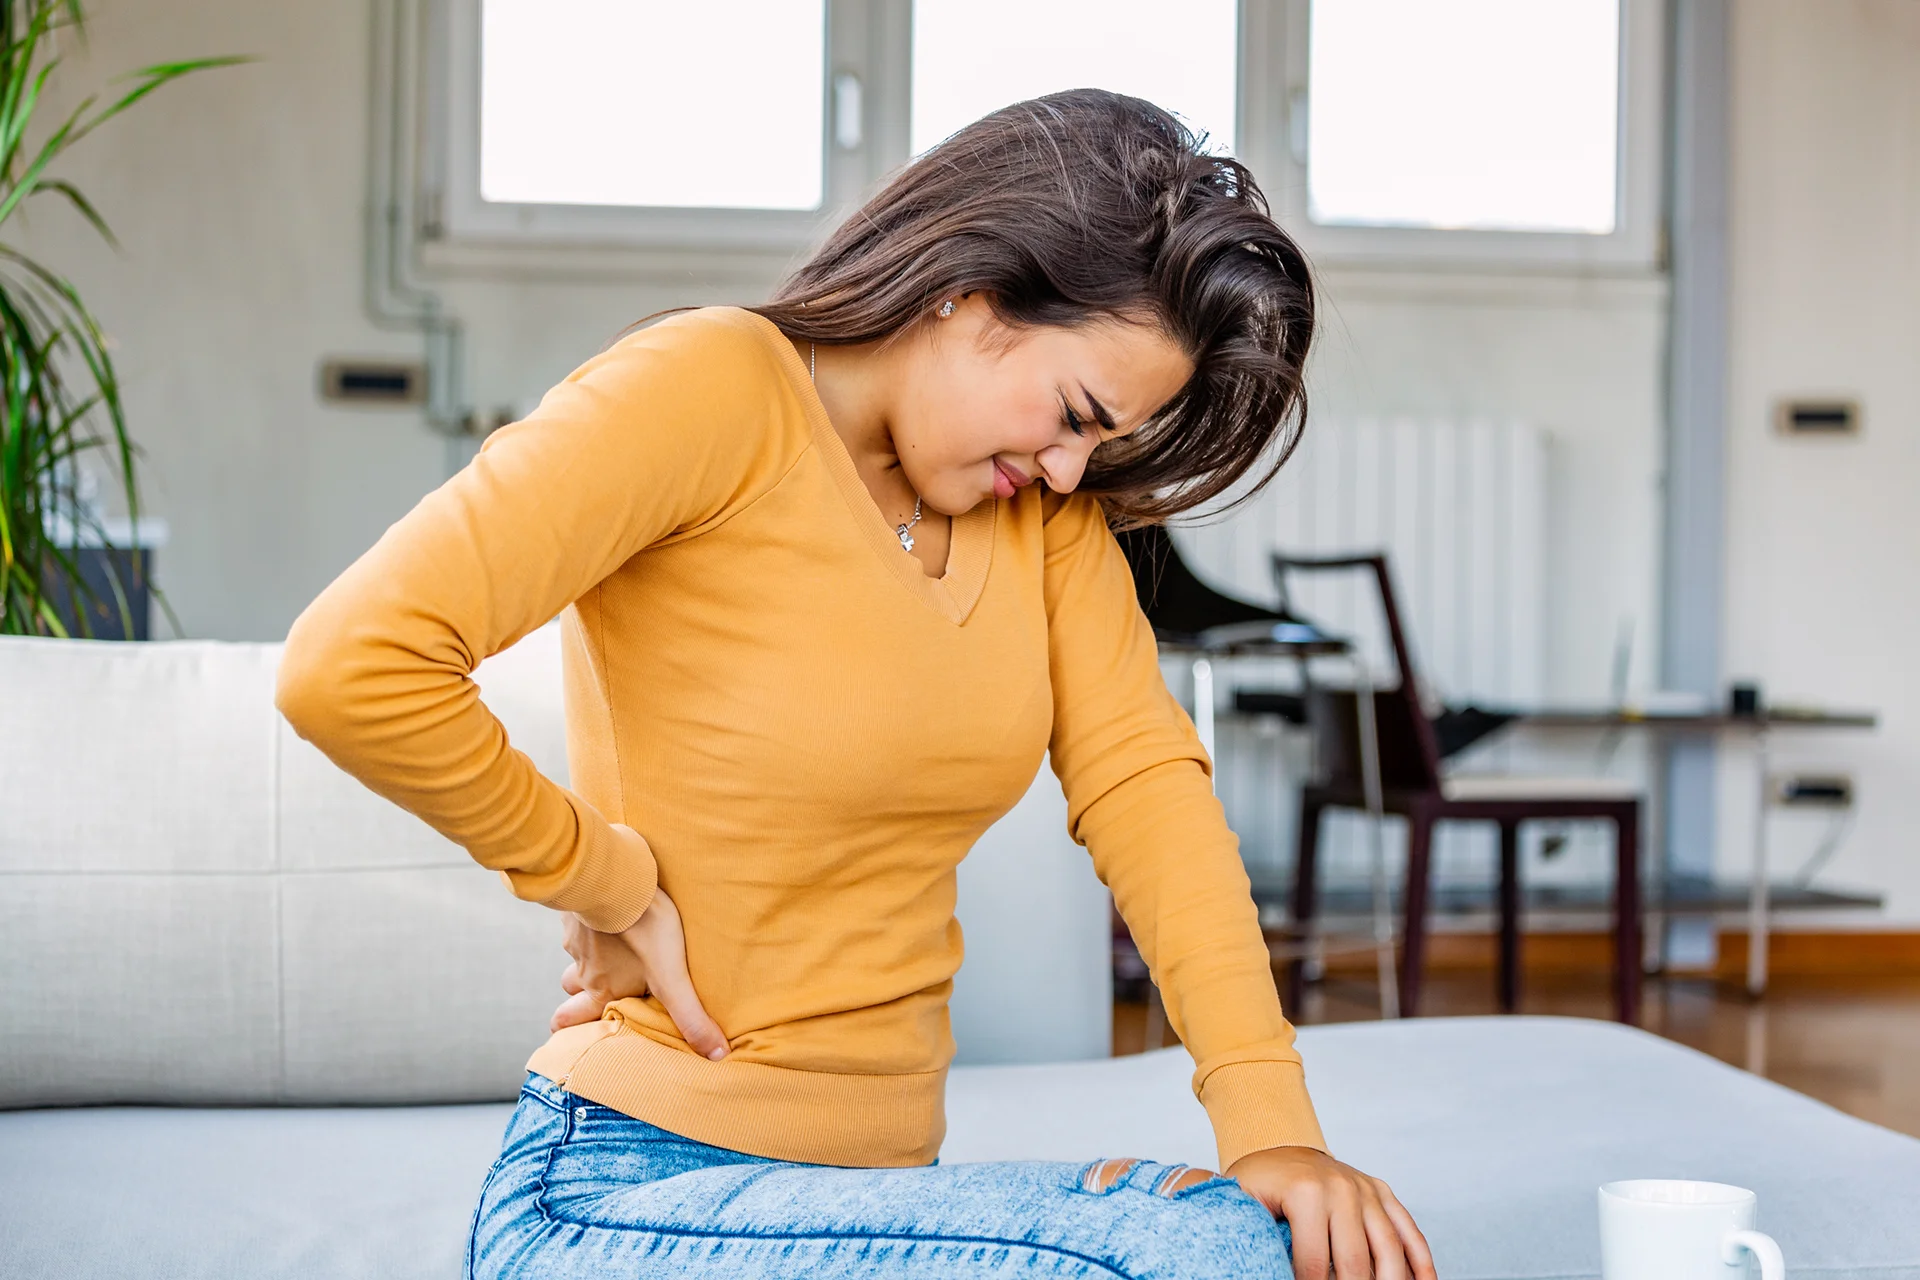 a woman suffers back pain